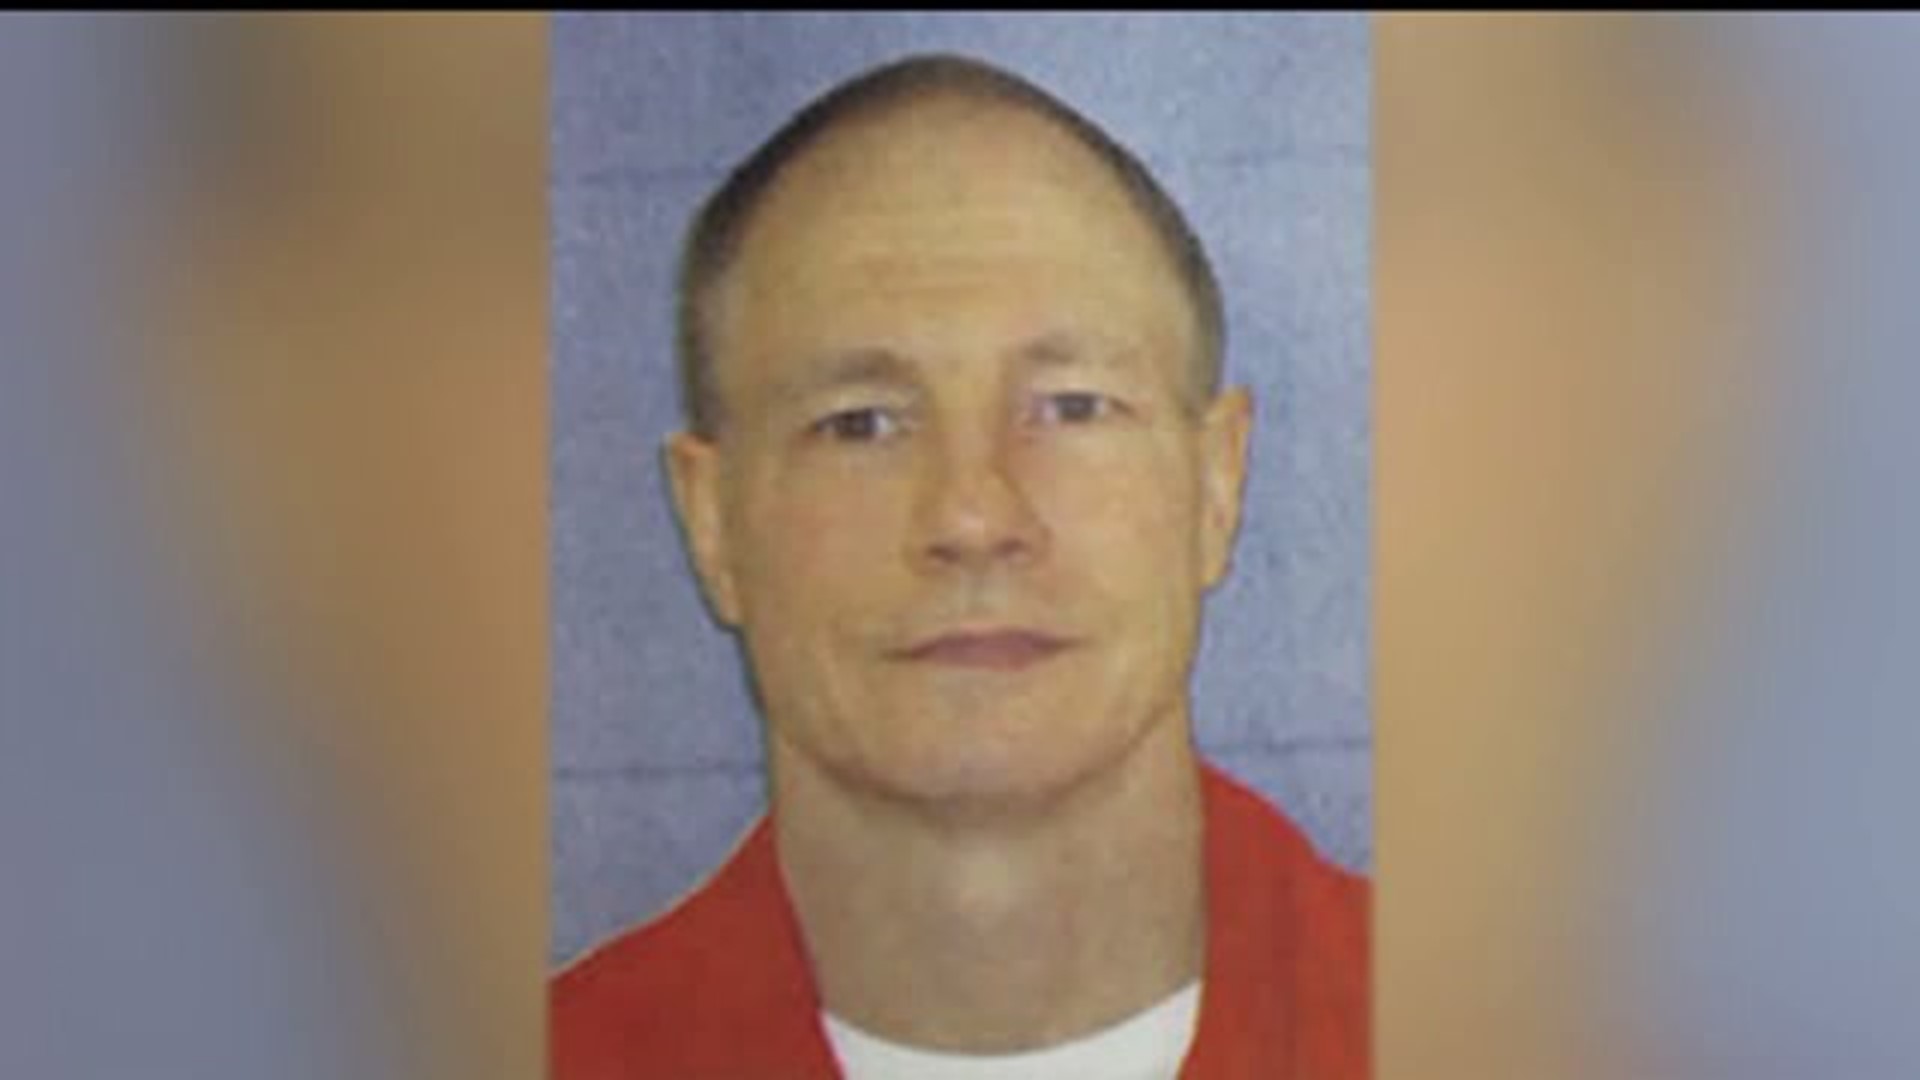 Governor Wolf defends decision to issue reprieve in execution of convicted killer